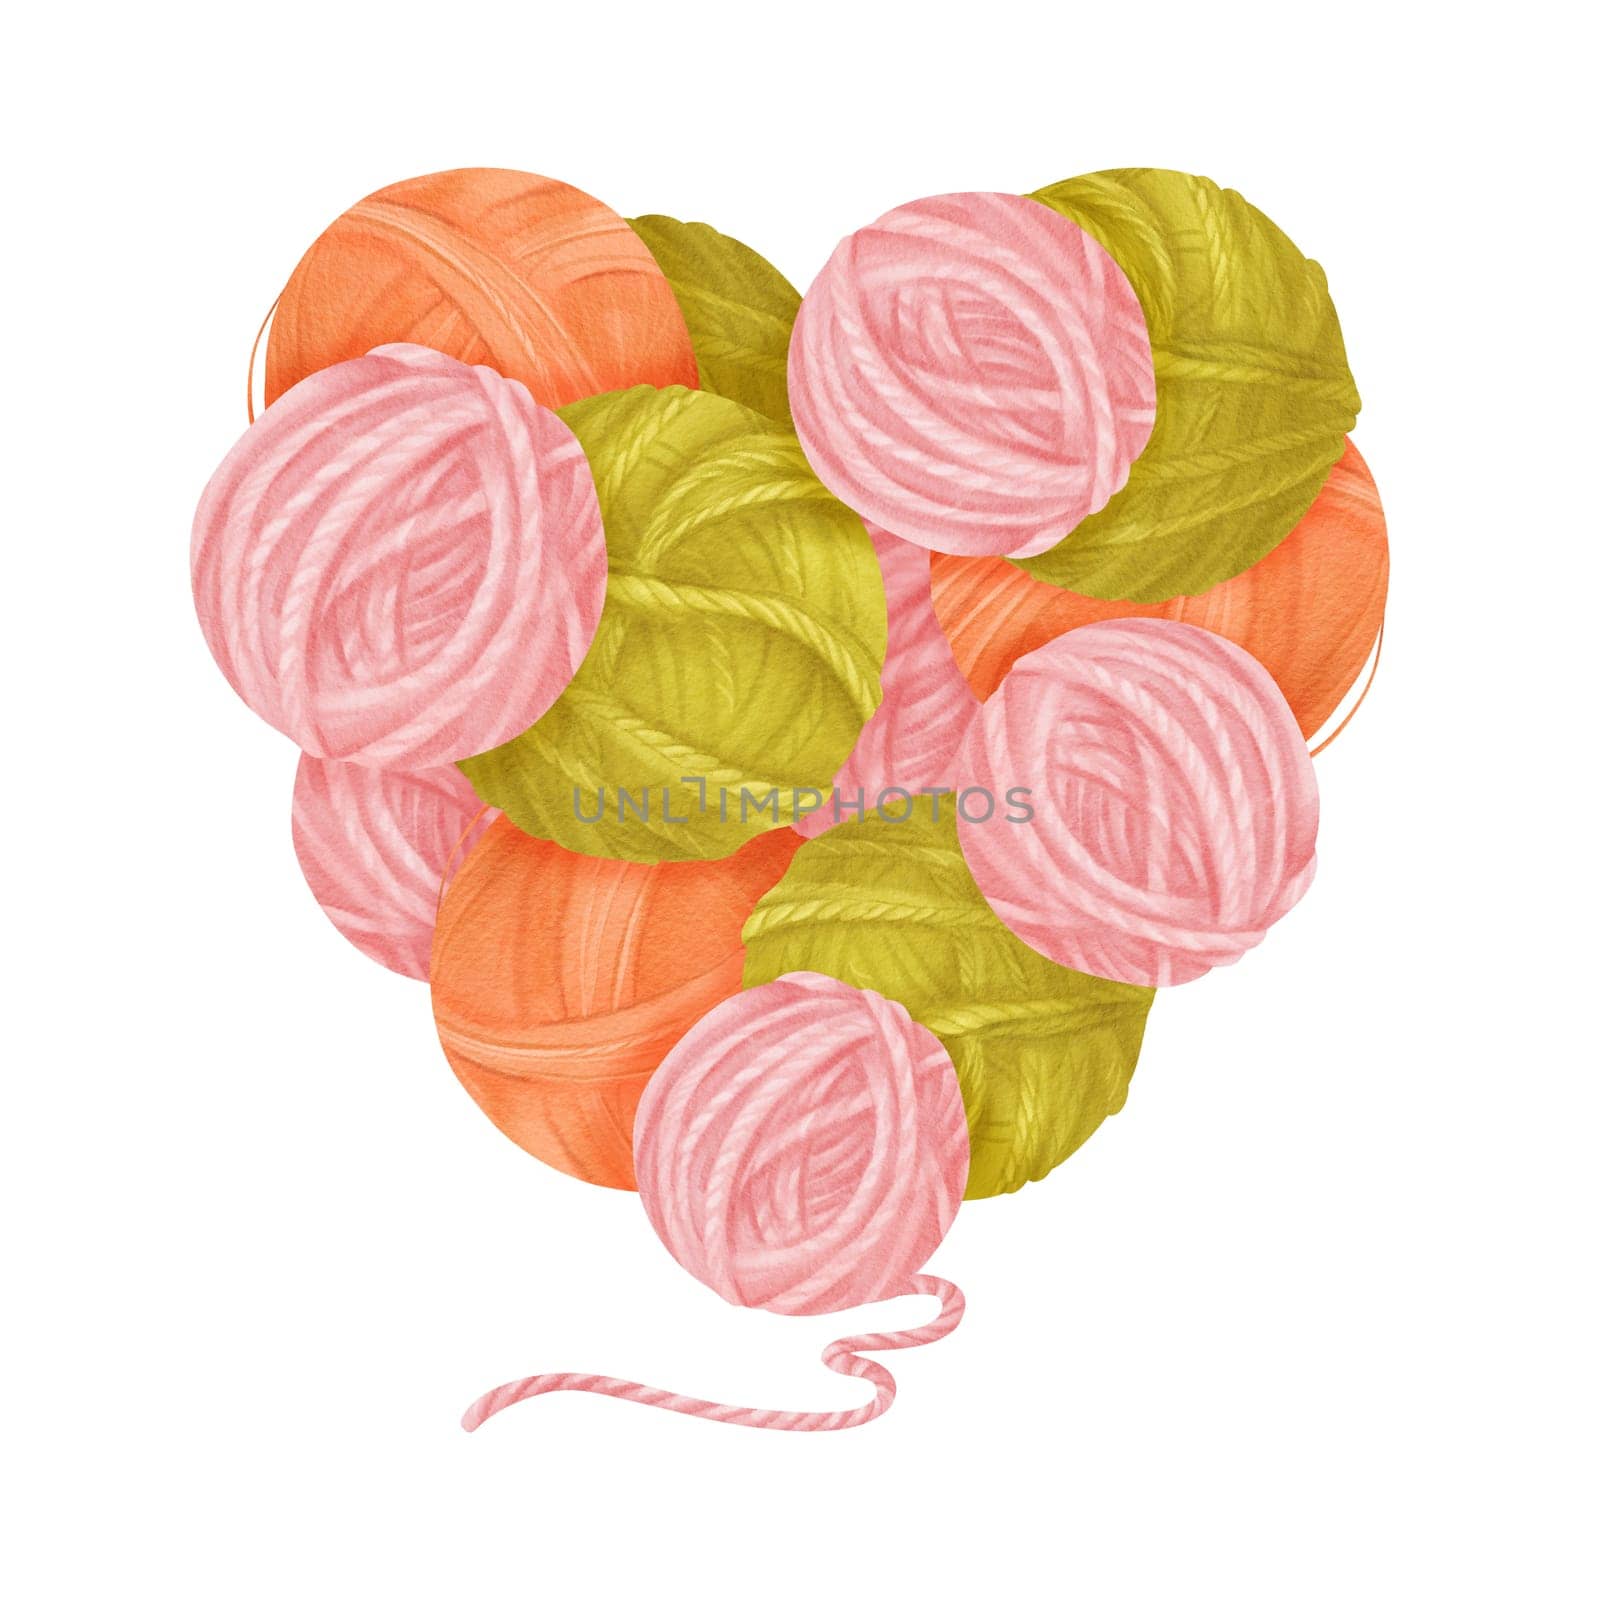 A heart-shaped composition themed around knitting, for knitting and sewing enthusiasts. a heart crafted from yarn skeins in shades of green pink and orange, for crafting projects or DIY-themed designs.